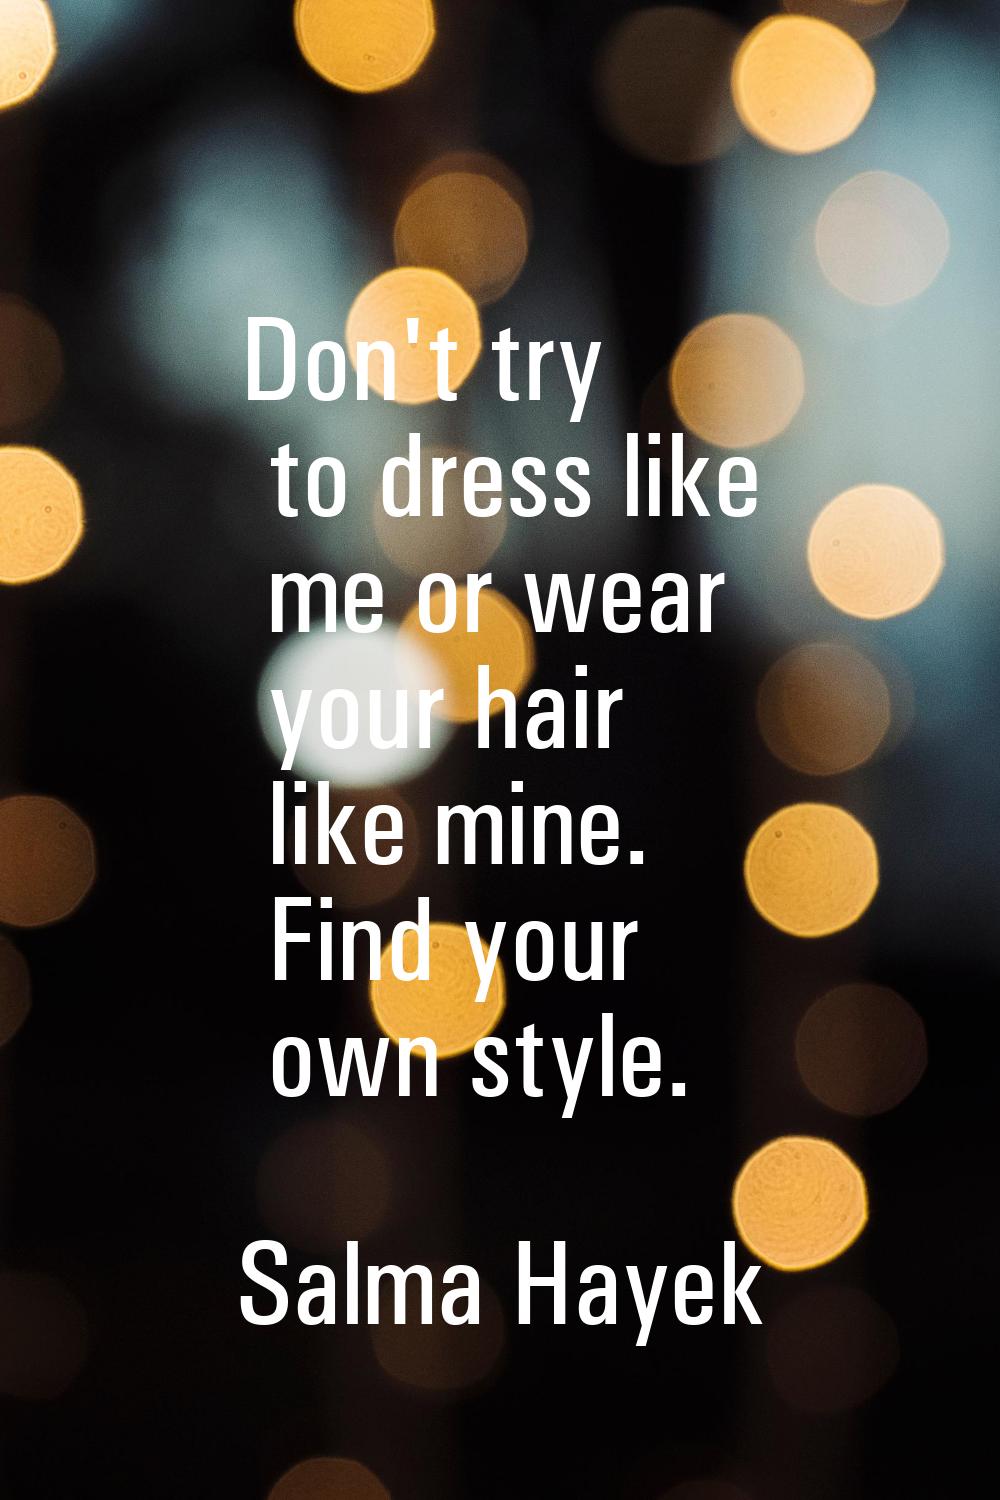 Don't try to dress like me or wear your hair like mine. Find your own style.